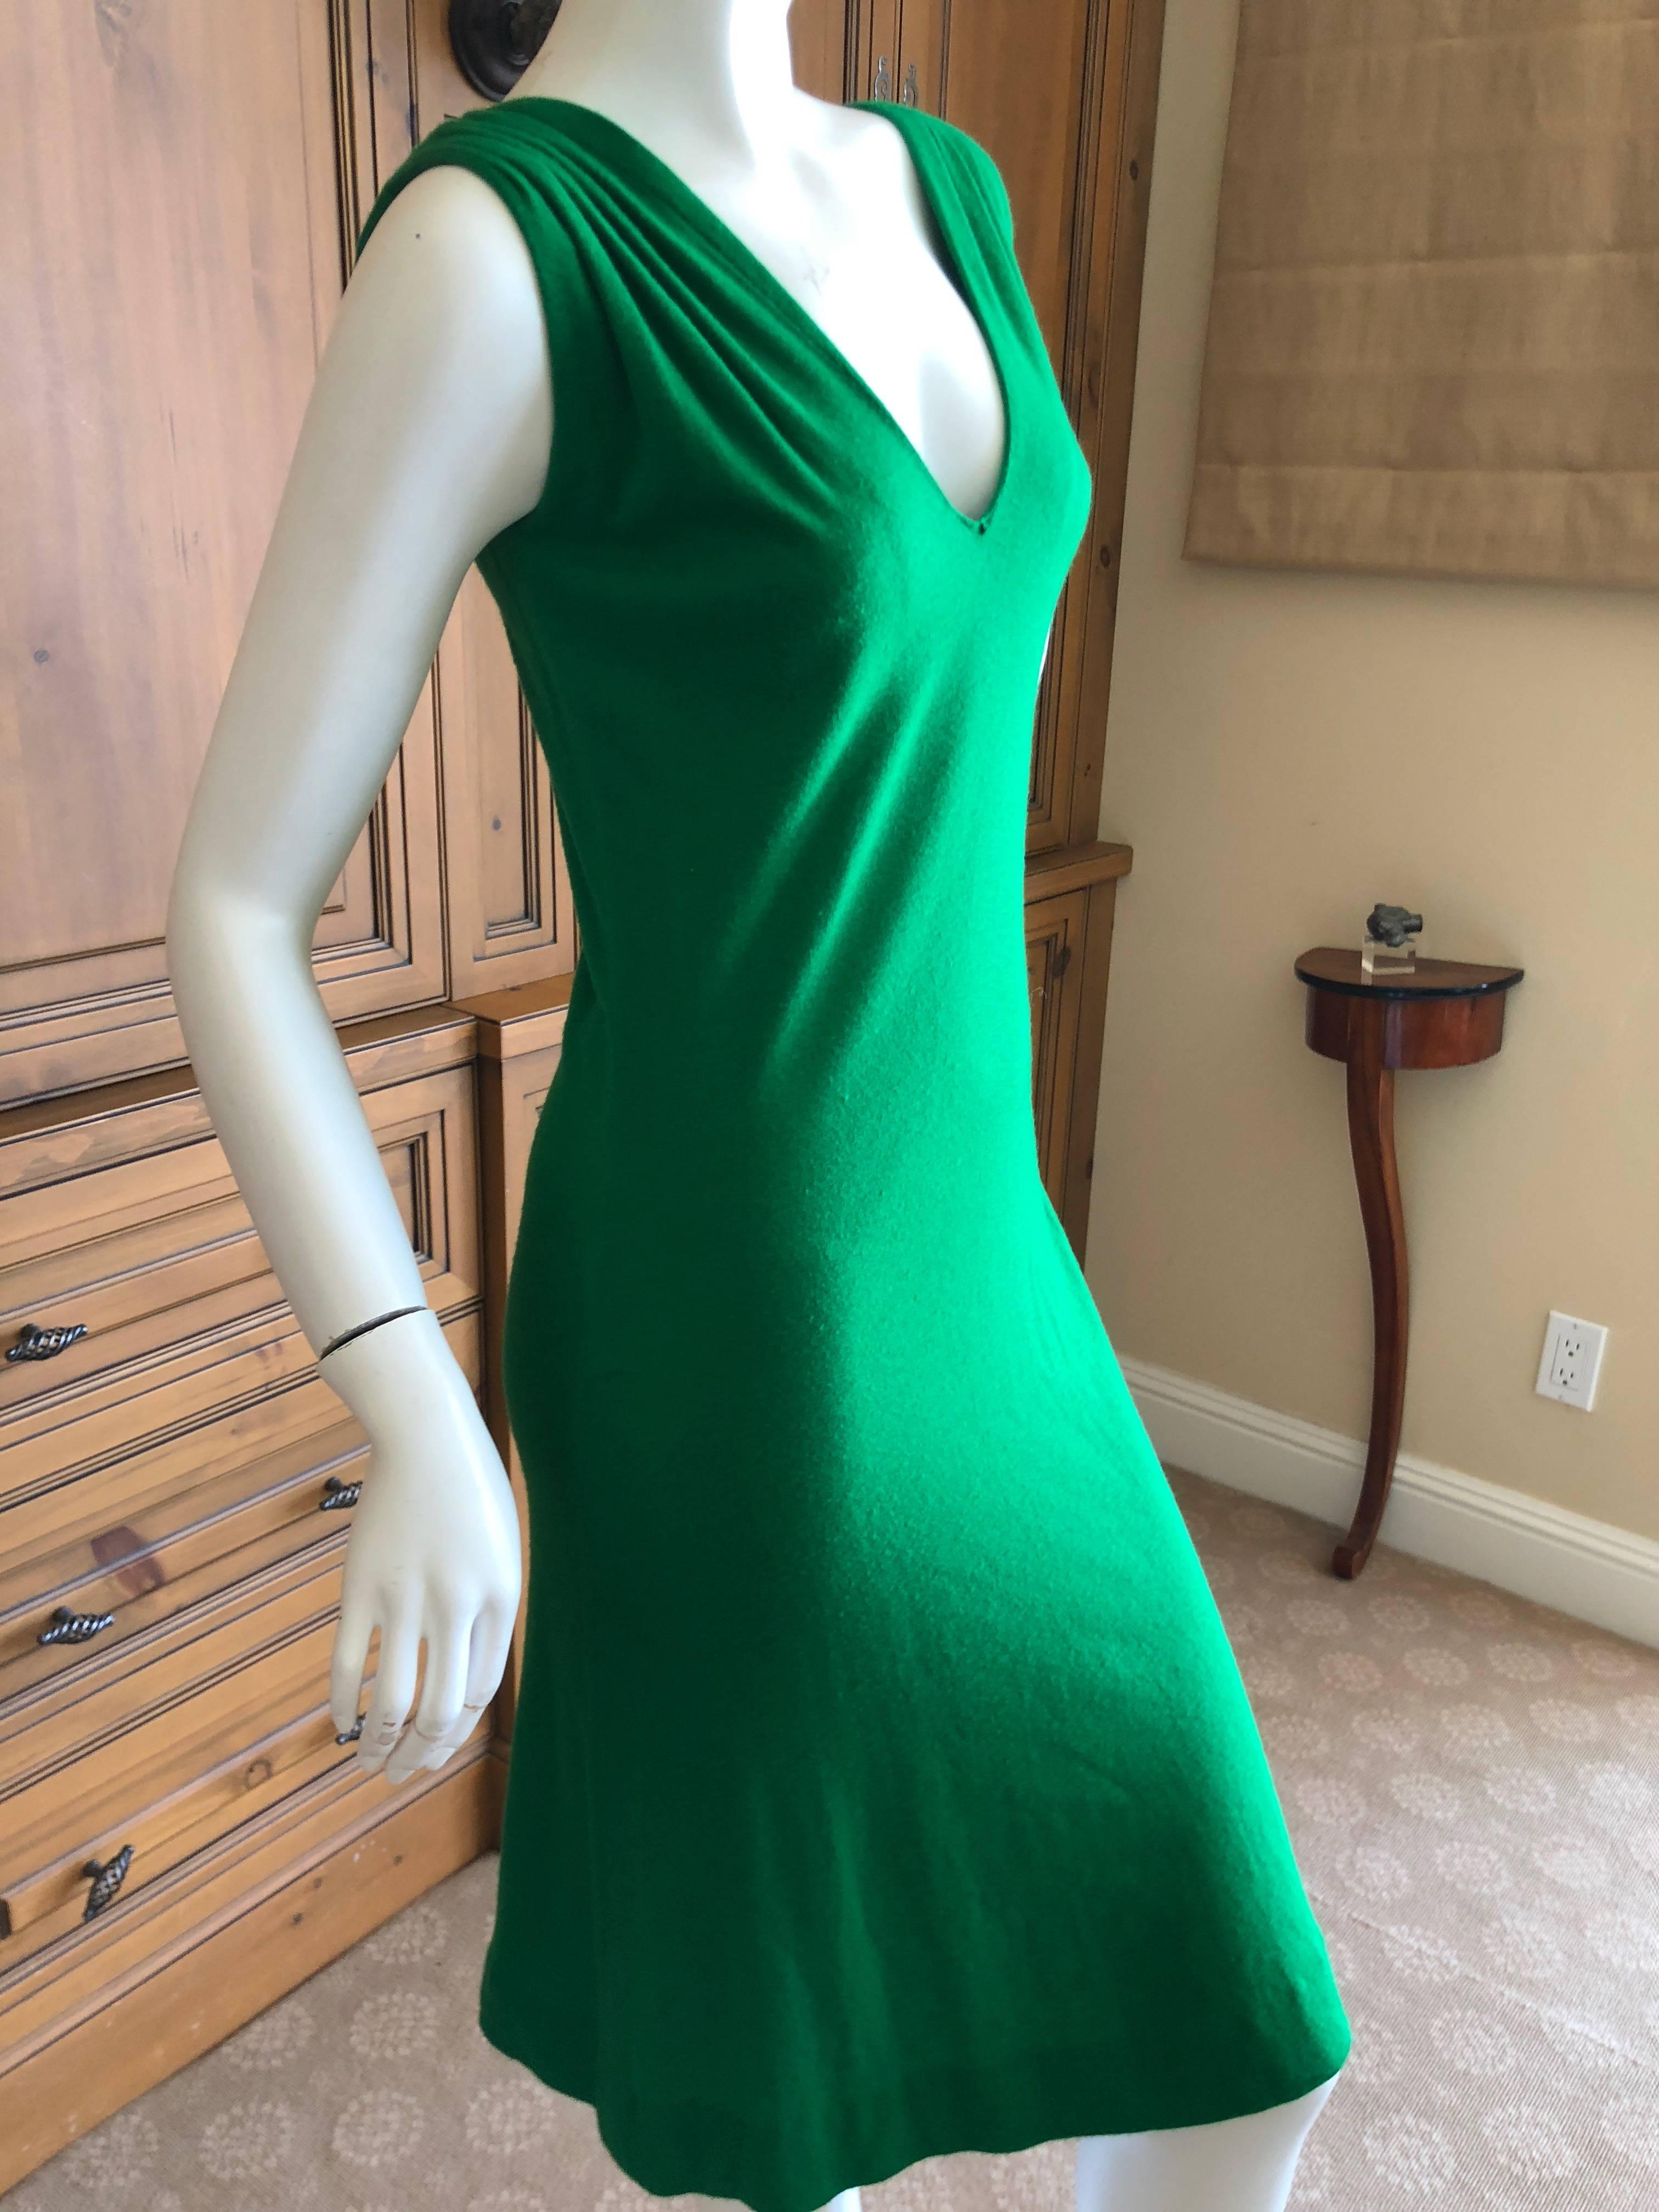 Cardinali Luxurious Lime Green Cashmere Dress and Matching Cape
From the Archive of Marilyn Lewis, the creator of Cardinali
Cardinali was founded in Los Angeles in 1970, by Marilyn Lewis, who had already found success as the founder and owner of the